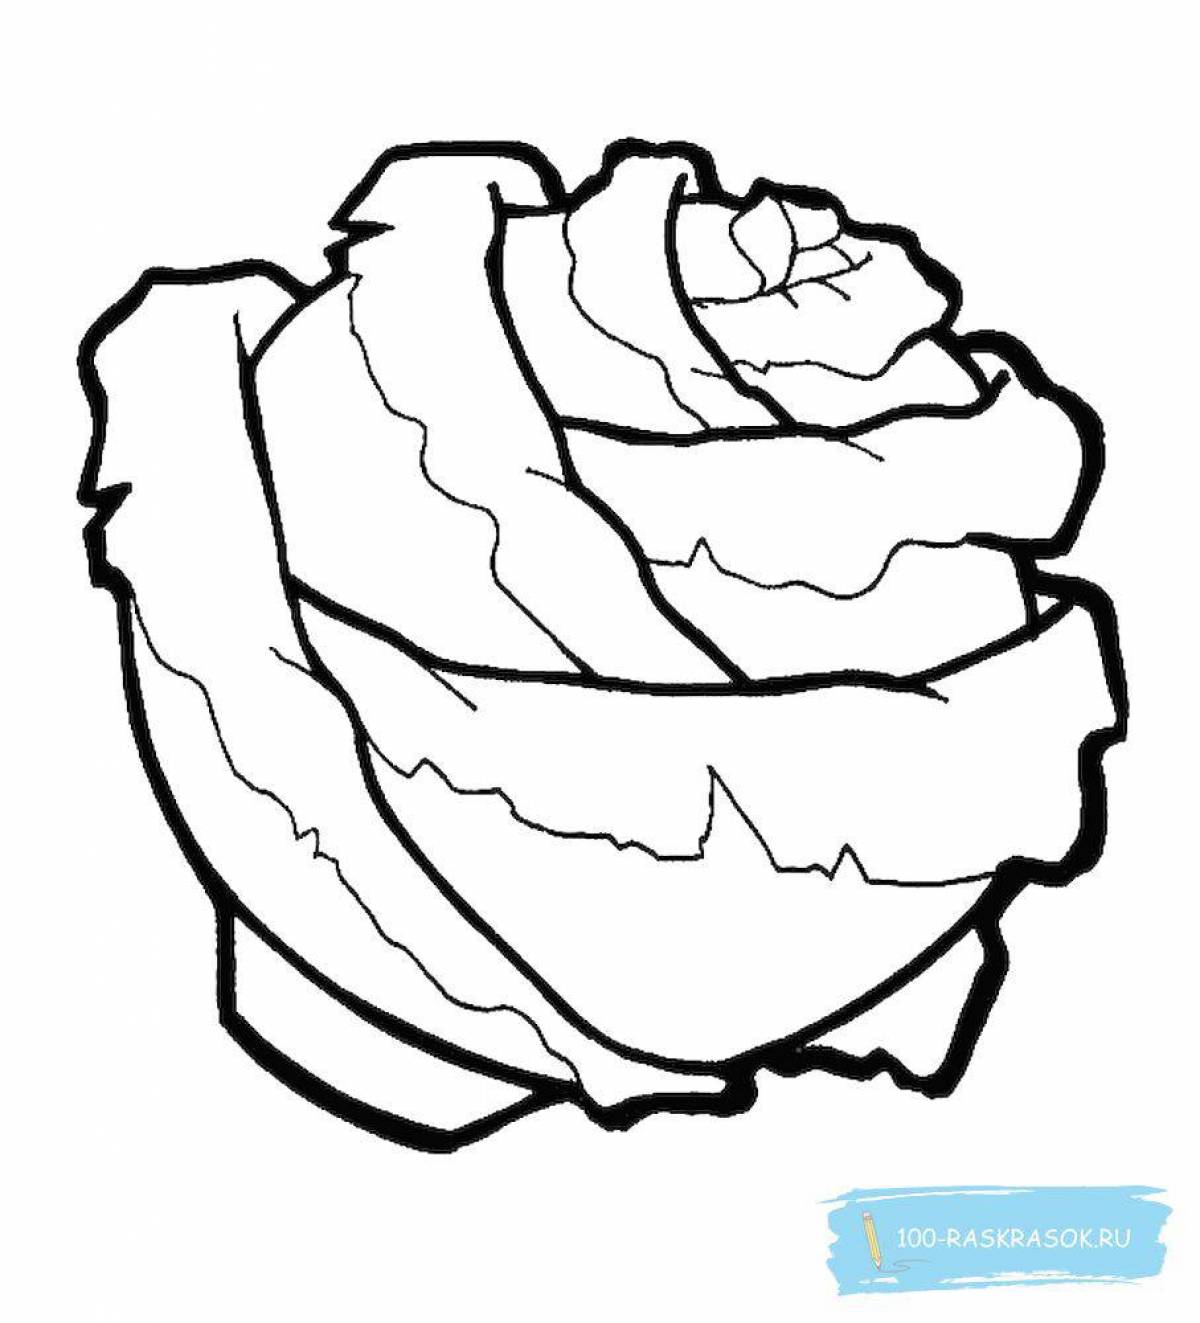 Colorful cabbage coloring page for kids